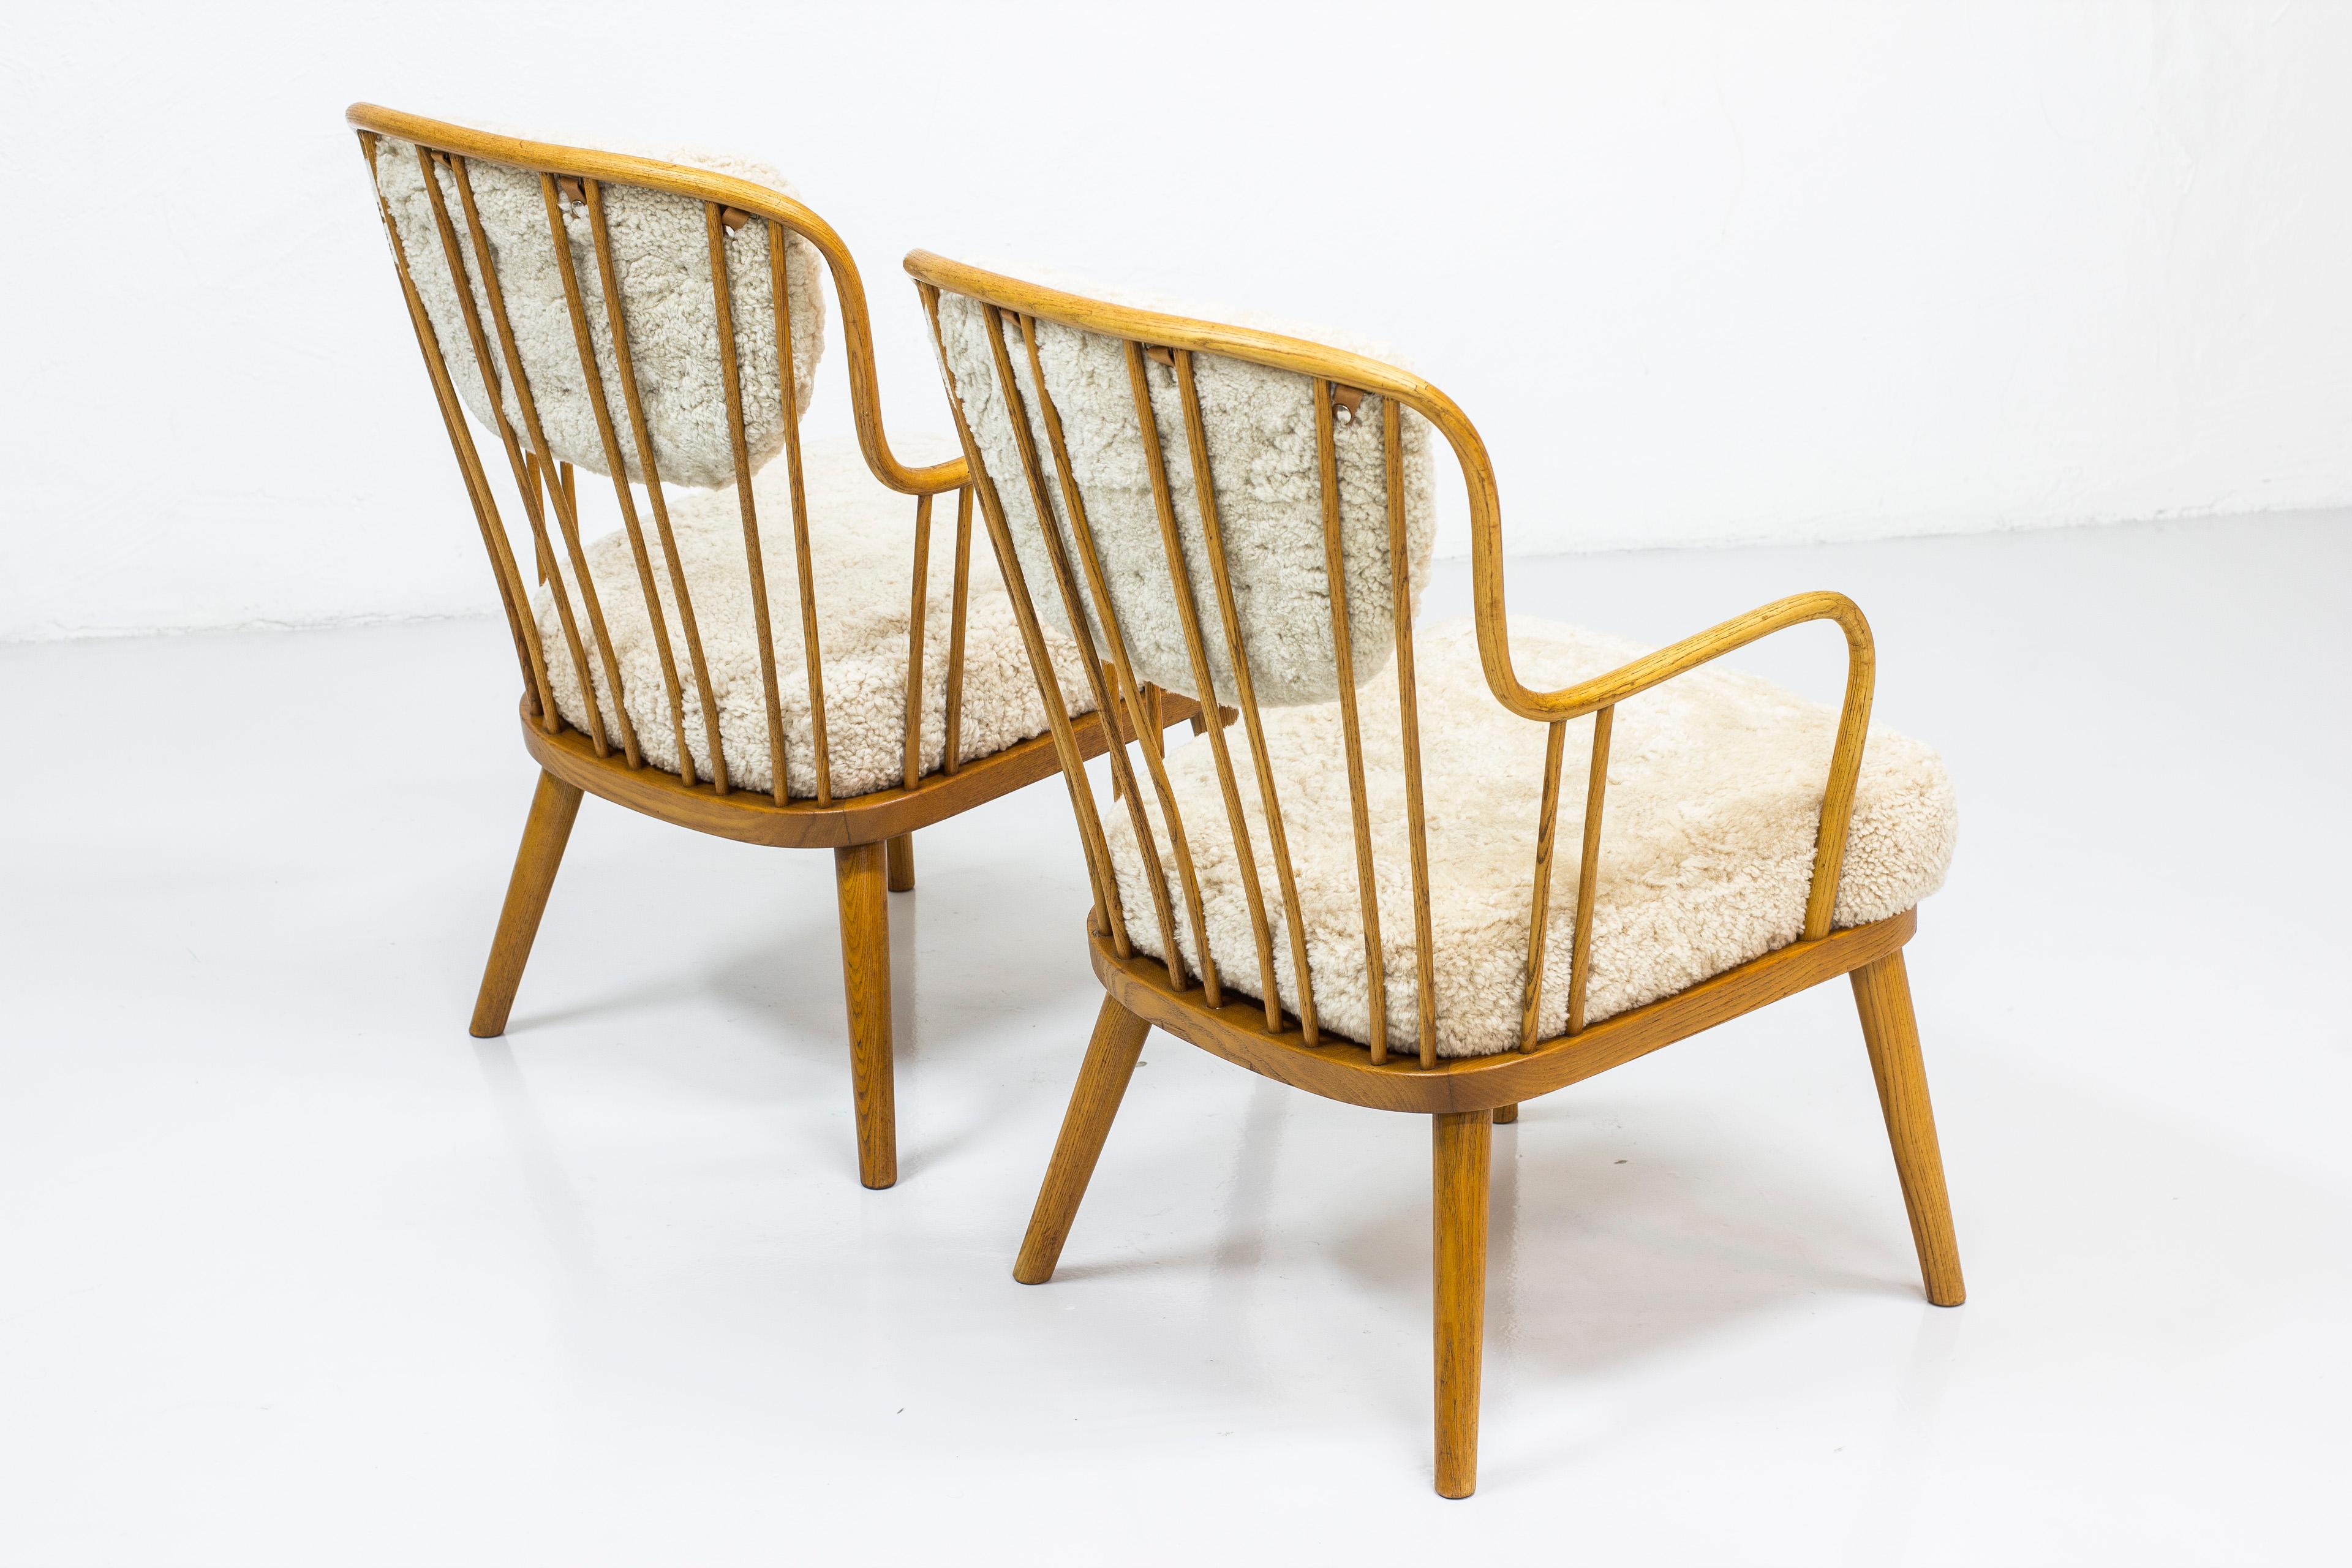 Pair of sheepskin easy chairs by Aage Herman Olsen, Denmark, 1940s a easy chairs designed by Danish interior architect Aage Herman Olsen. Produced by Kocks Snickerier in Sweden during the 1940s. Made from oakwood with steam bent oak arm- and